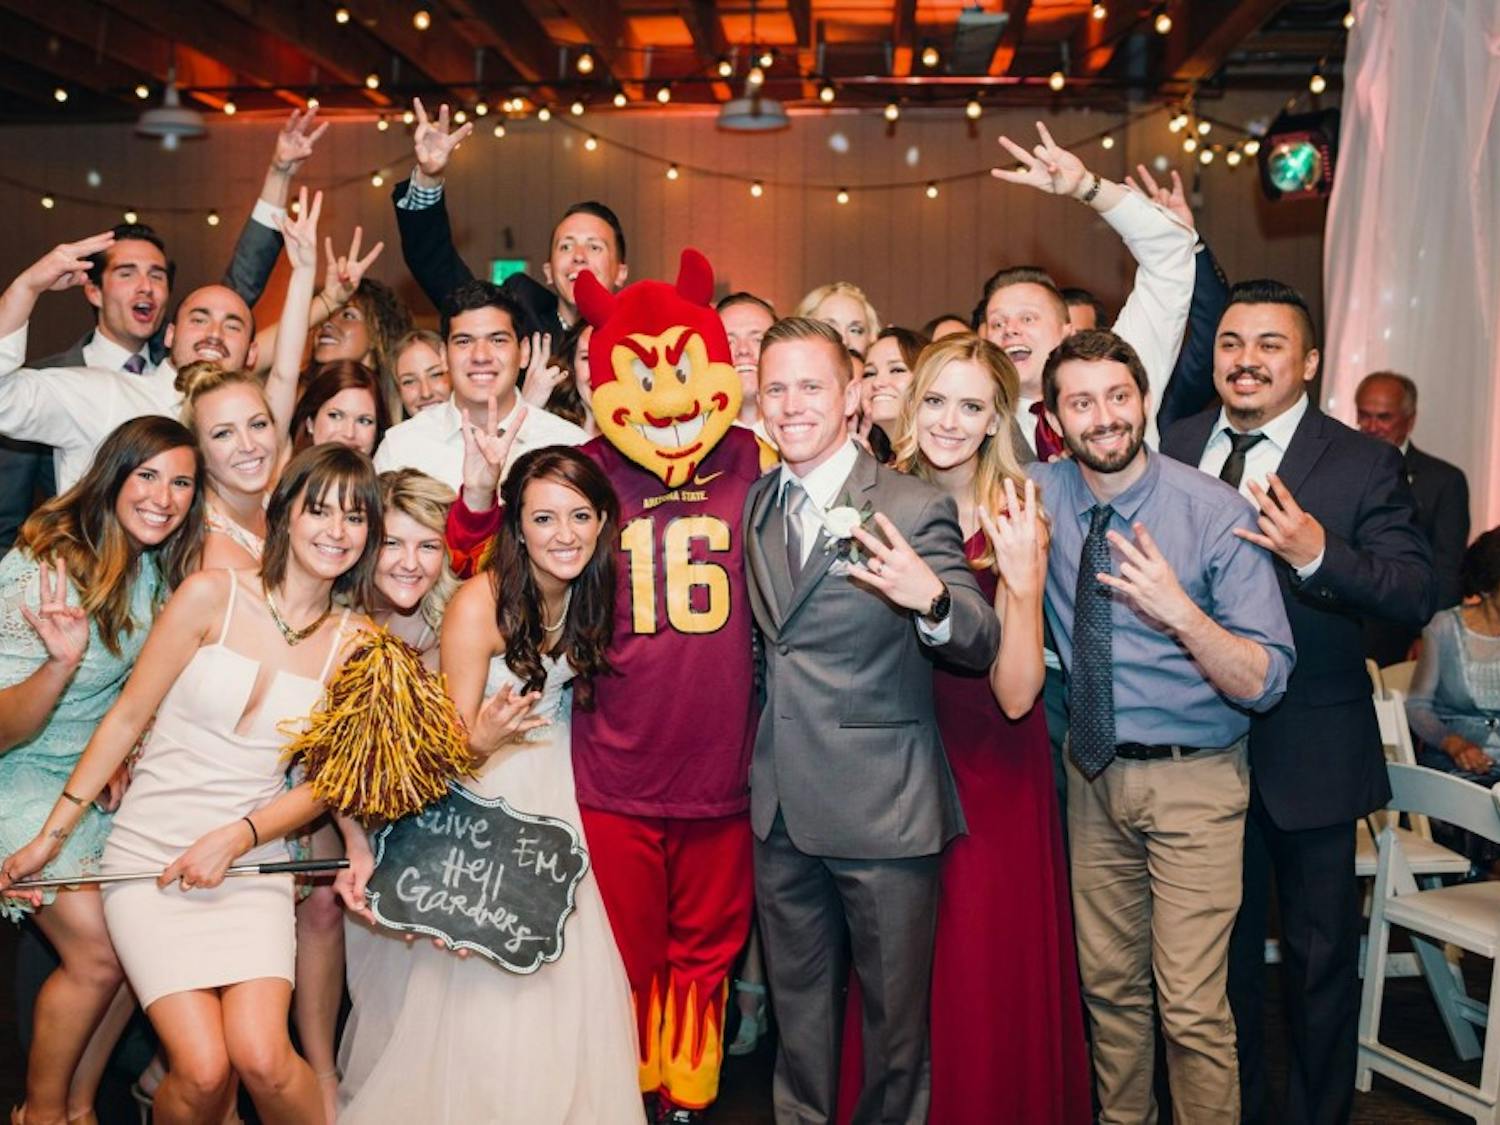 Sparky surprises the couple at their wedding in 2016.